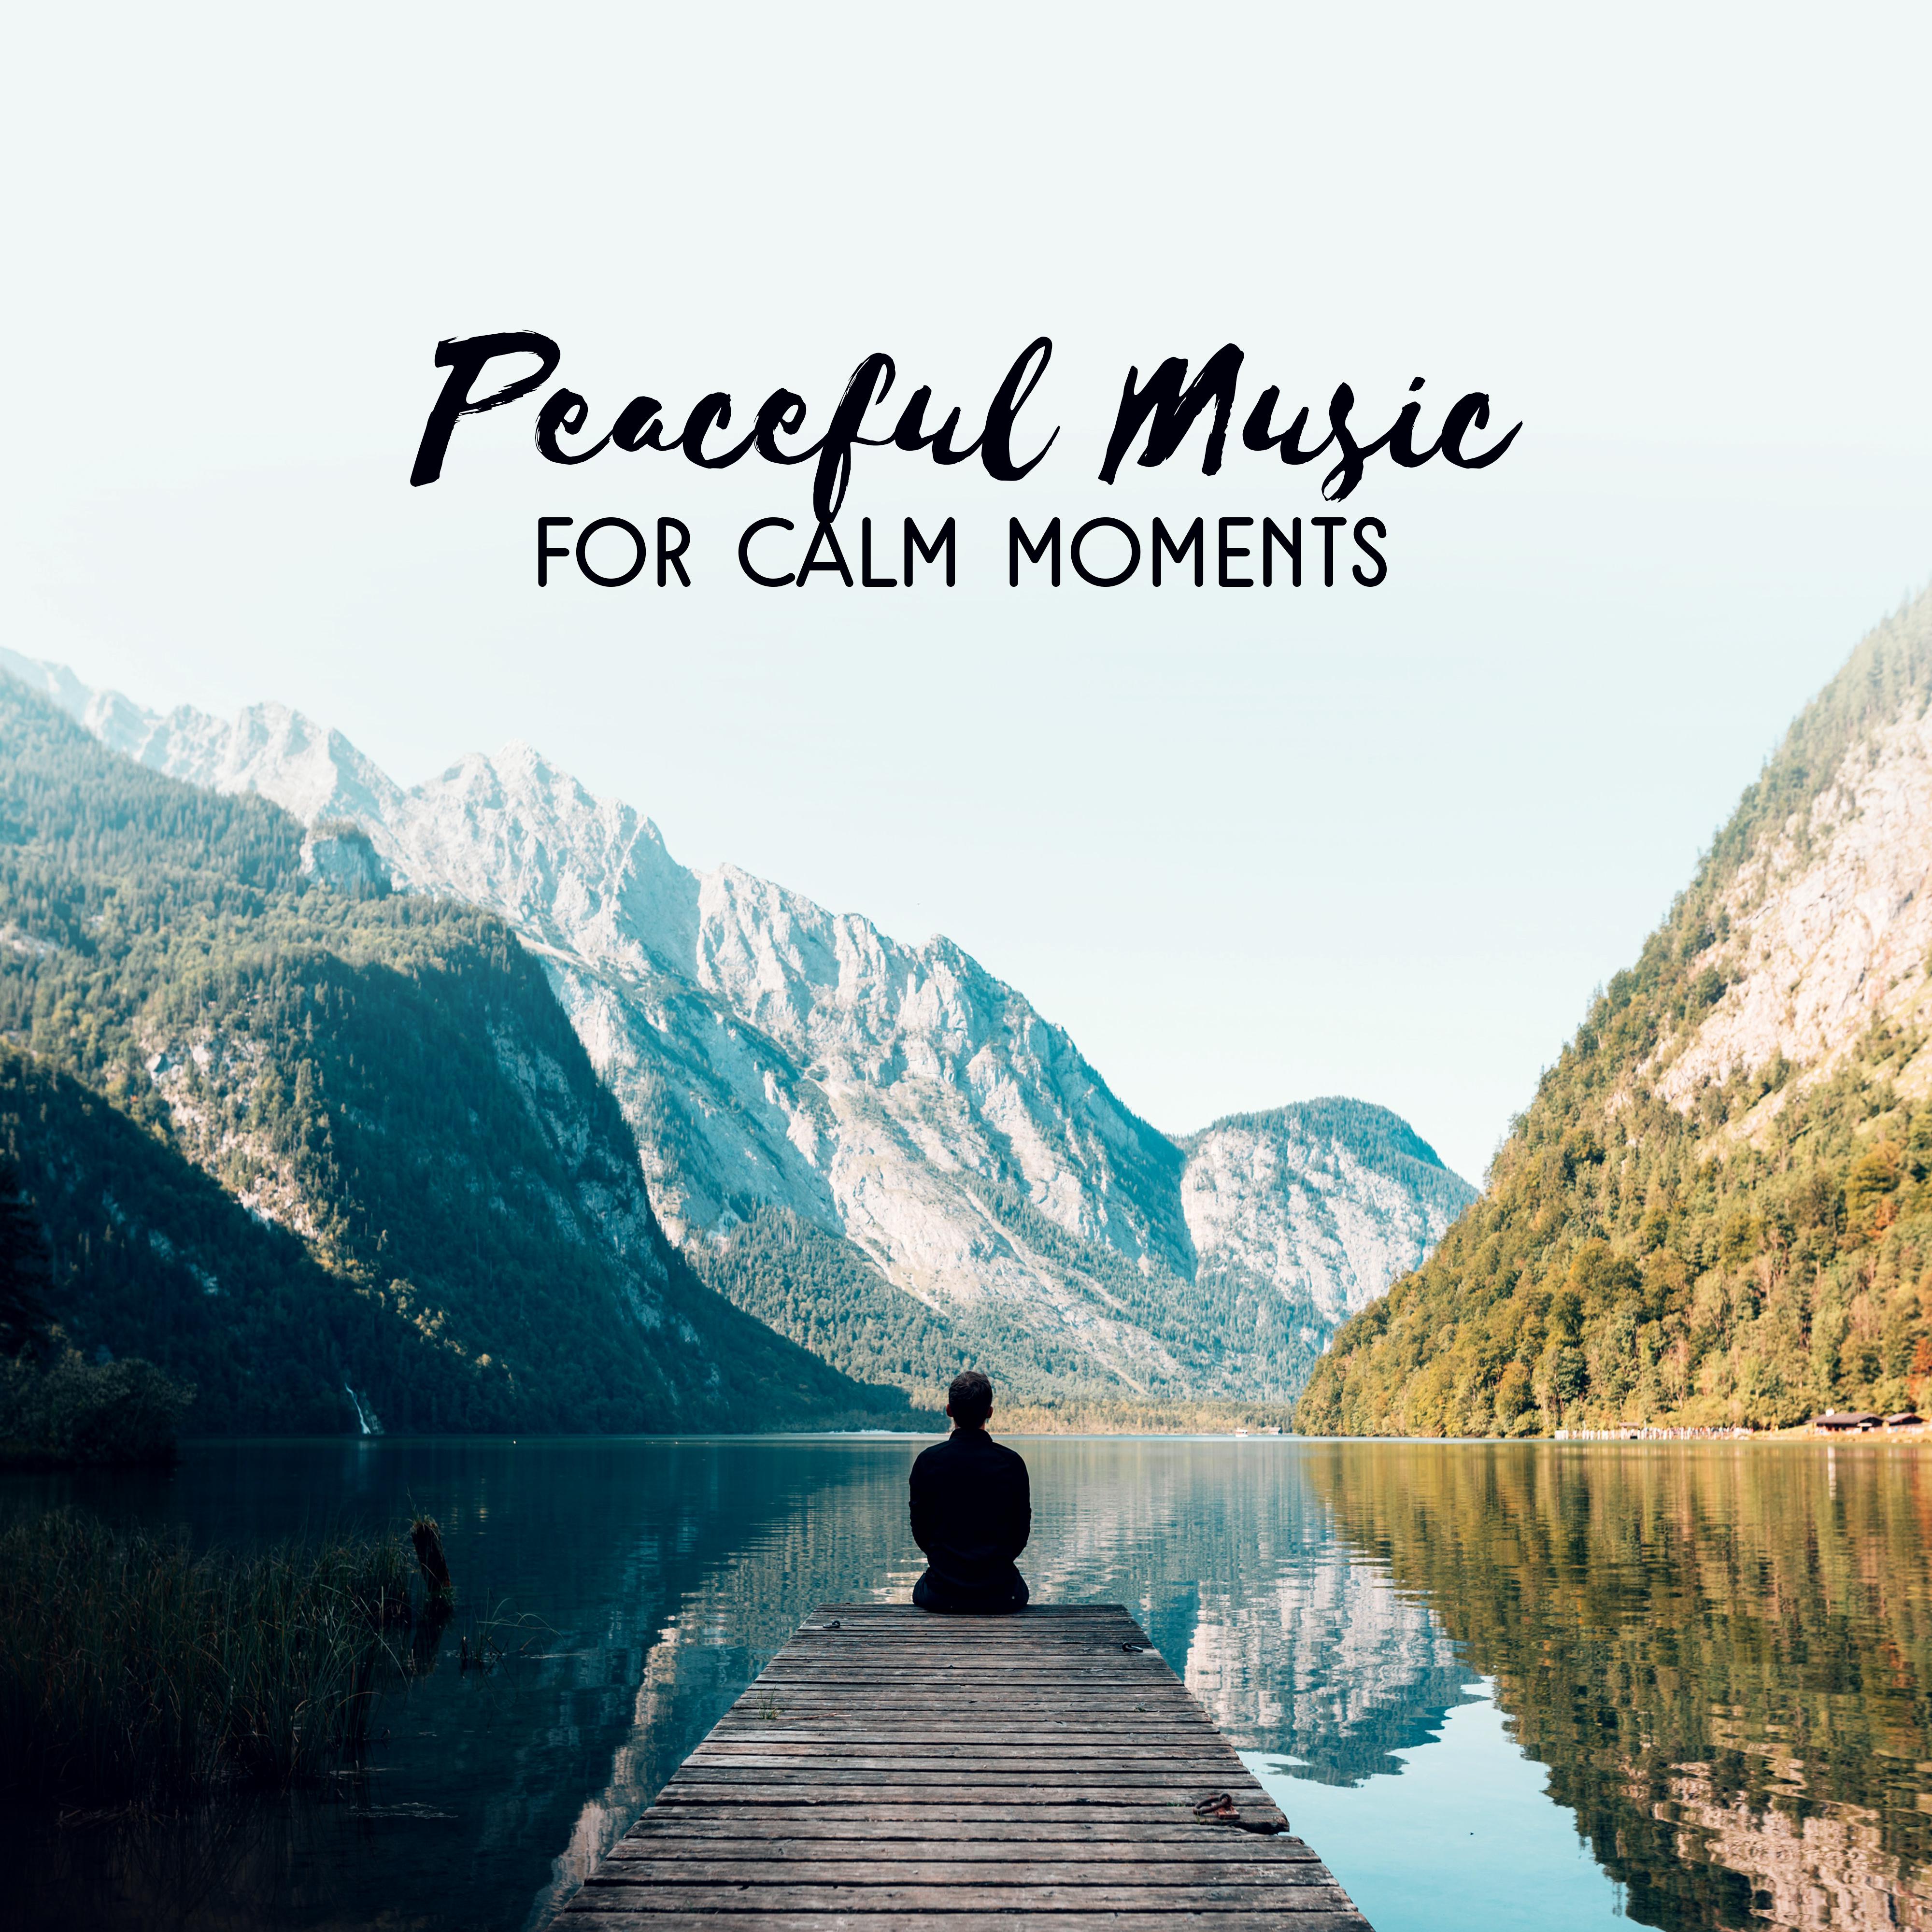 Peaceful Music for Calm Moments